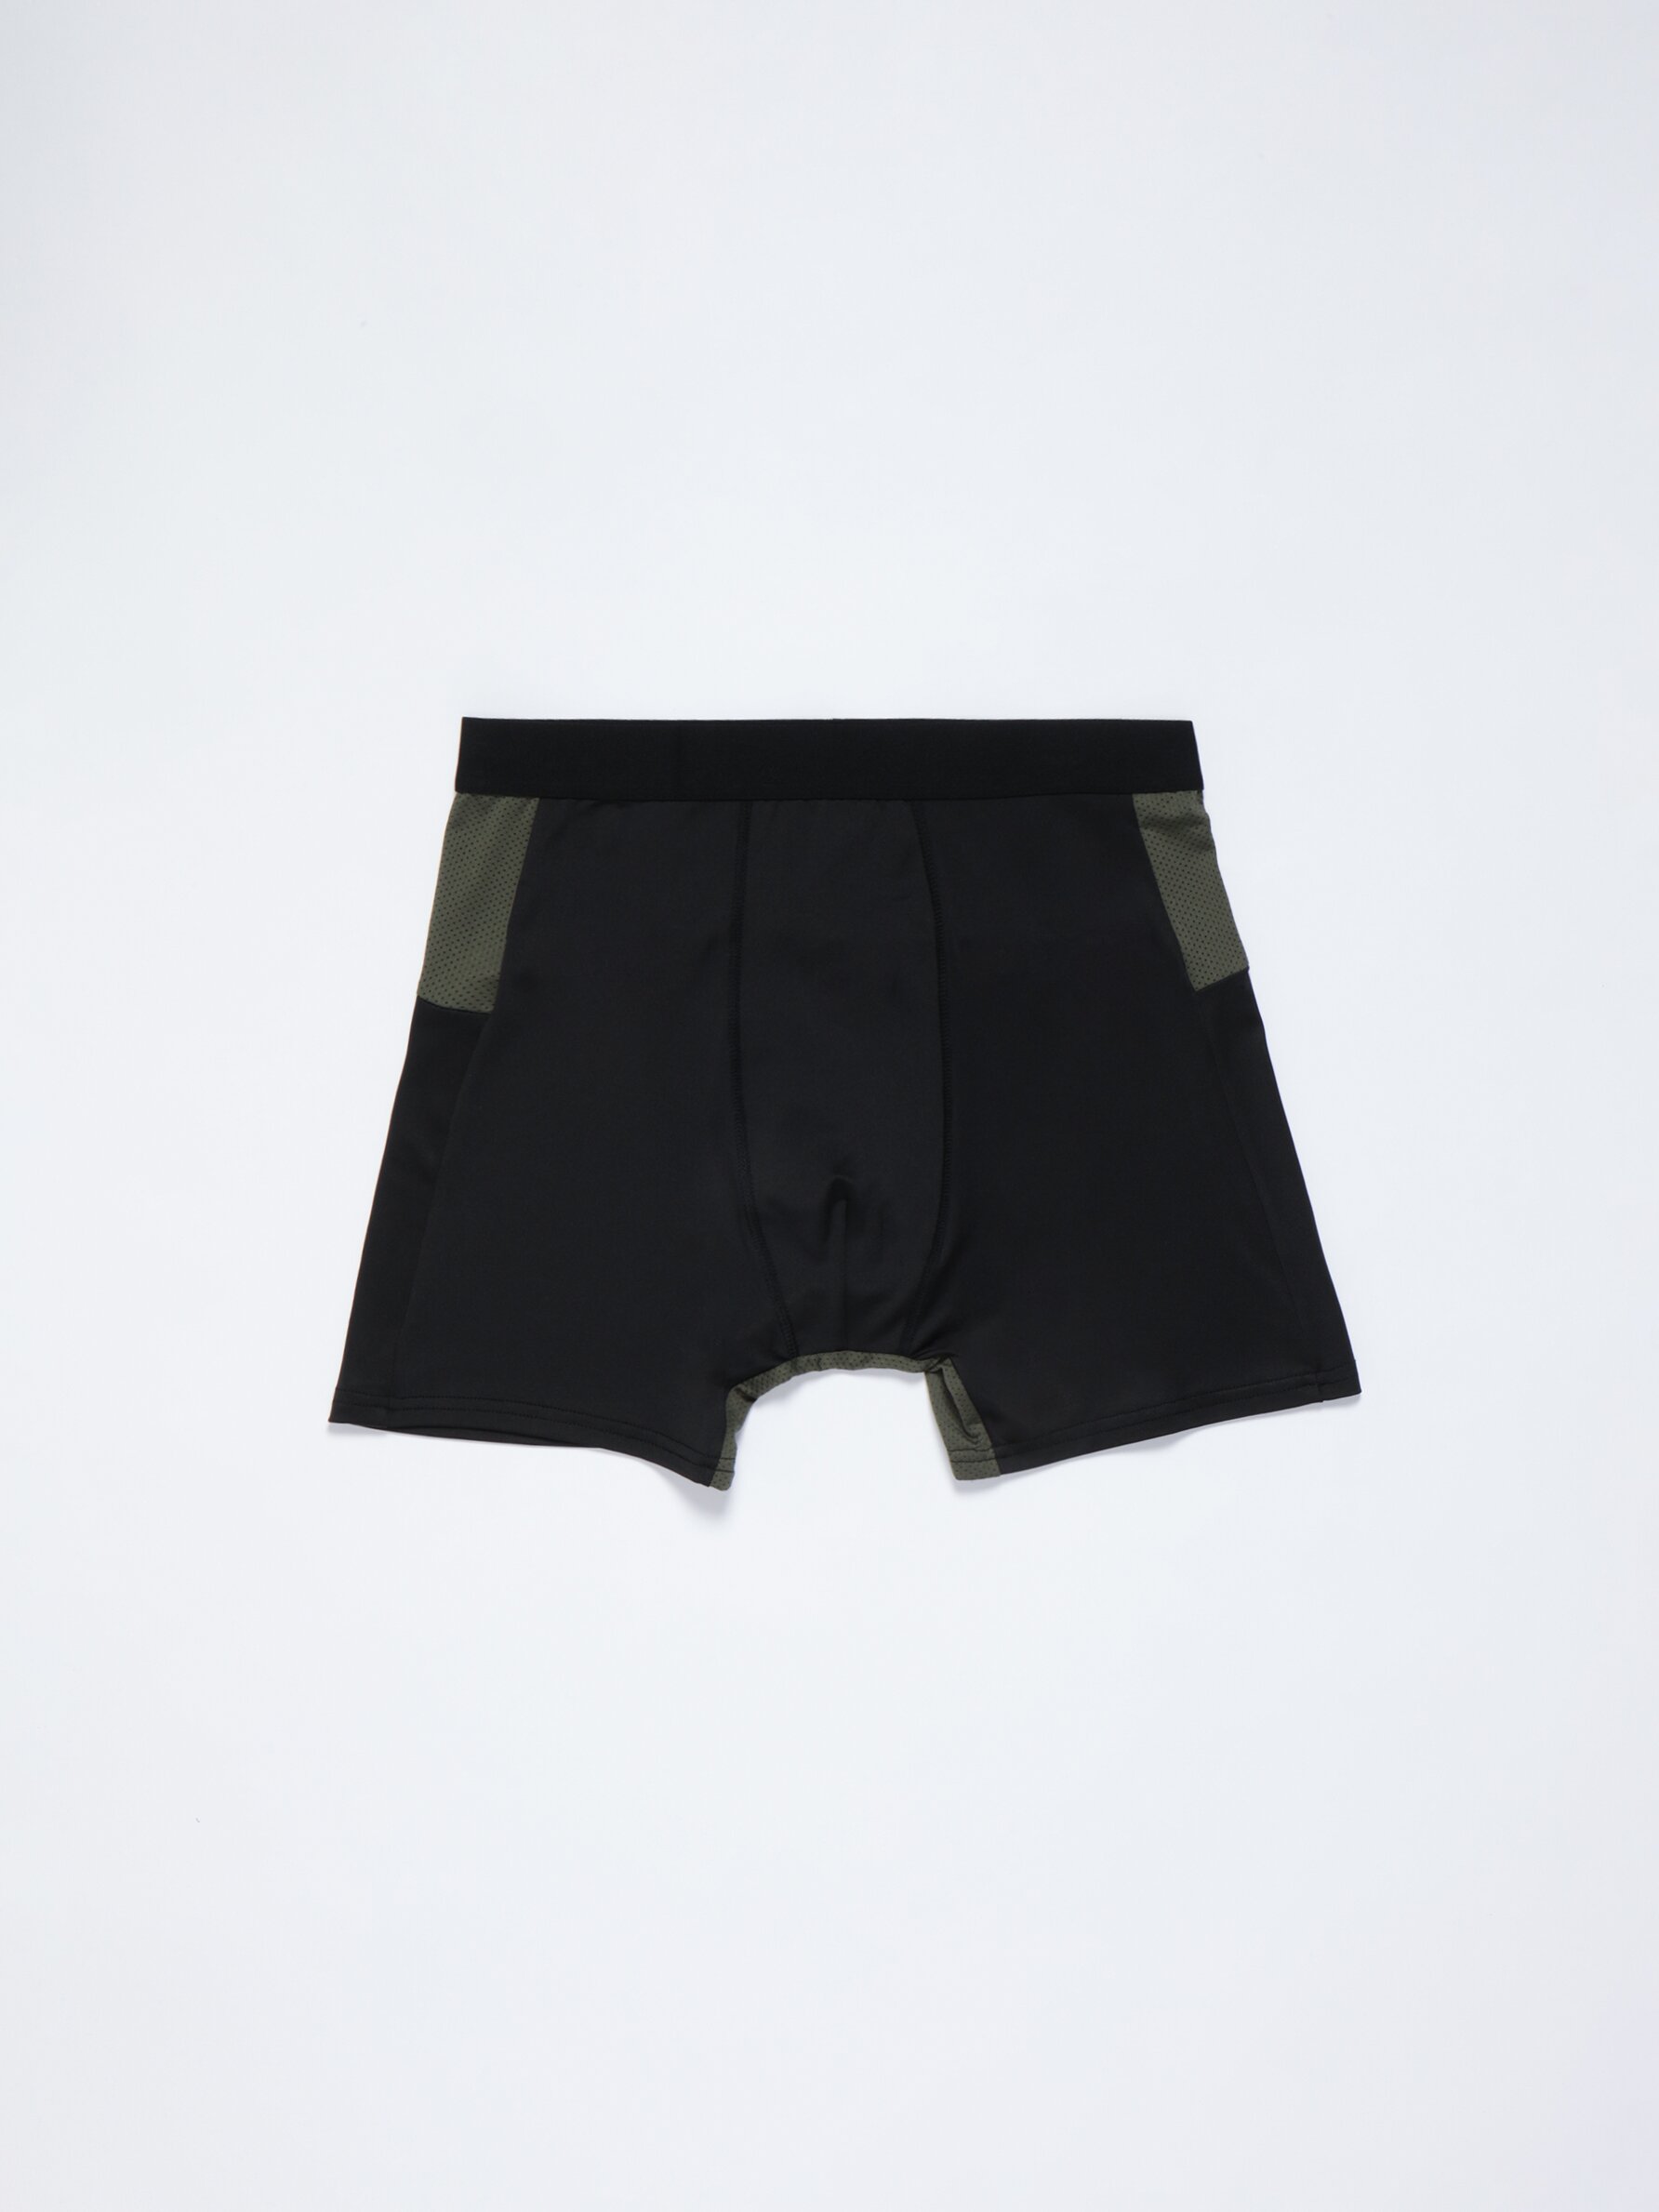 Pack of 2 pairs of sports boxers. - Boxers - CLOTHING - Man